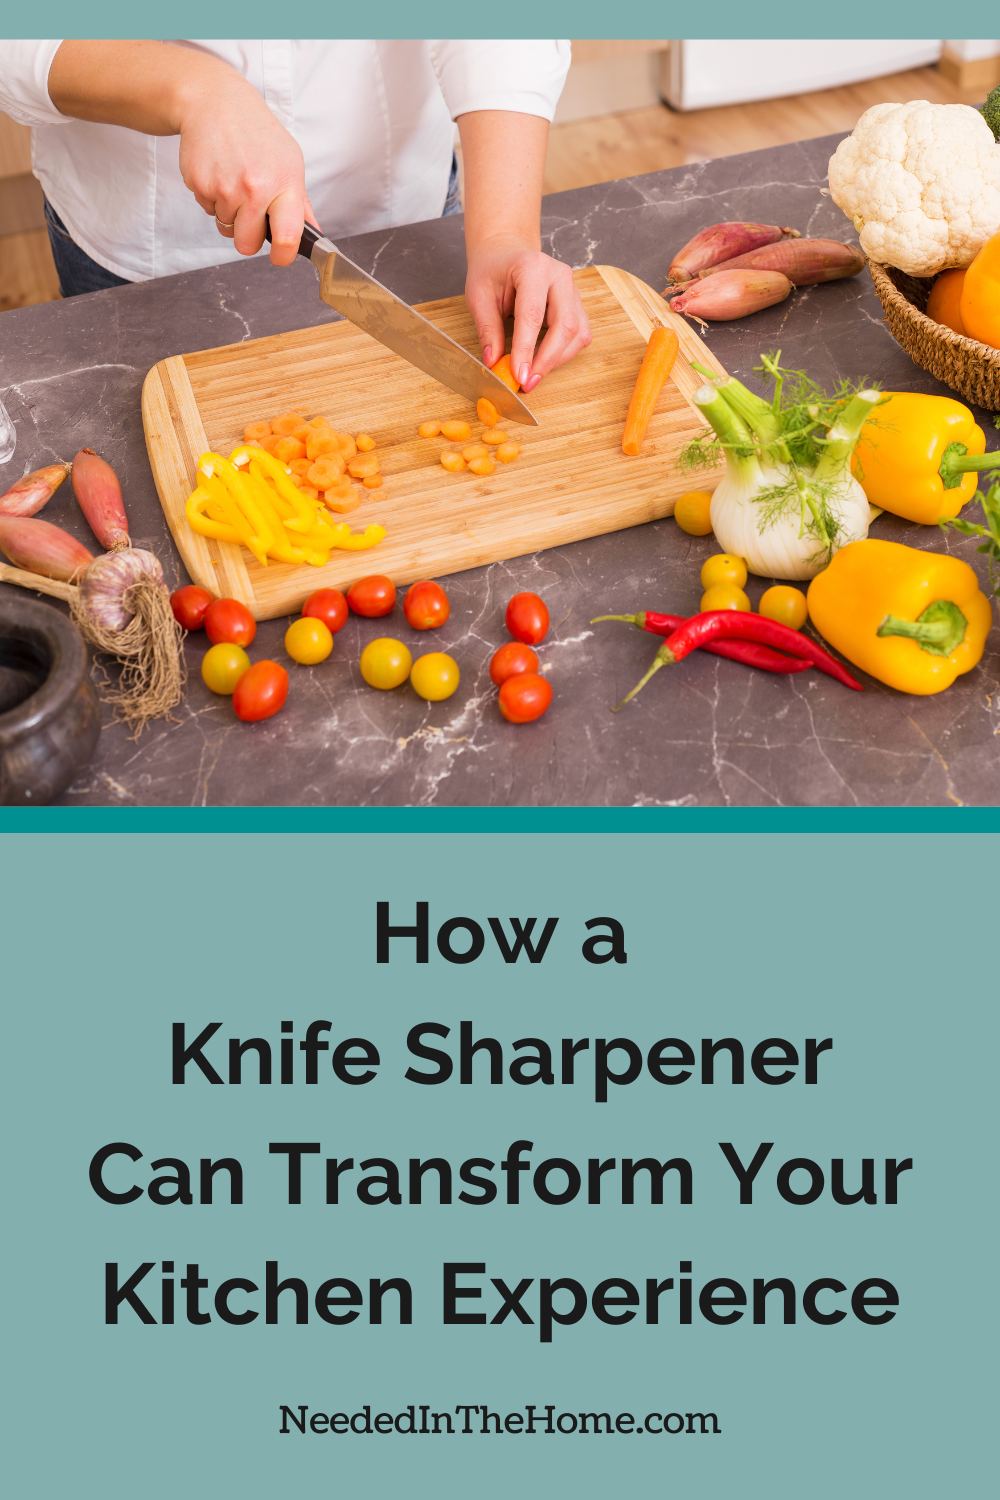 person cutting vegetables on a wooden cutting board how a knife sharpener can transform your kitchen experience neededinthehome